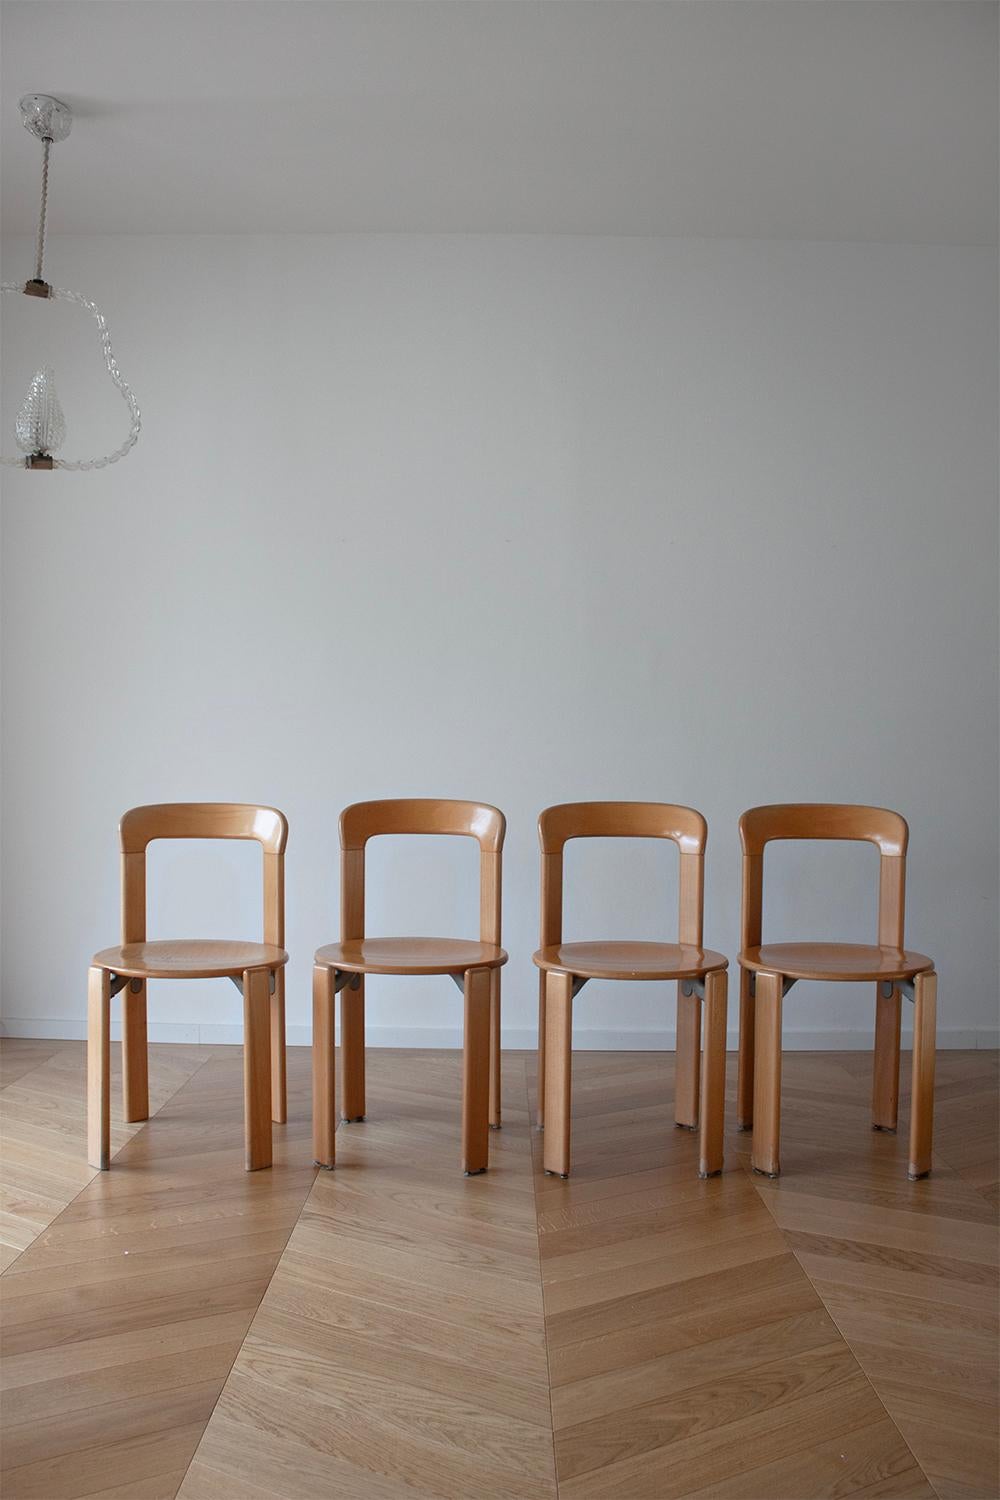 A set of 4. original Bruno Rey chairs. Made by Dietiker in Stein am Rhein, Switzerland.
These Swiss design classics have been a staple of Swiss interiors since 1971.
Its minimal, rounded, and timeless shape has never gone out of style. The Rey